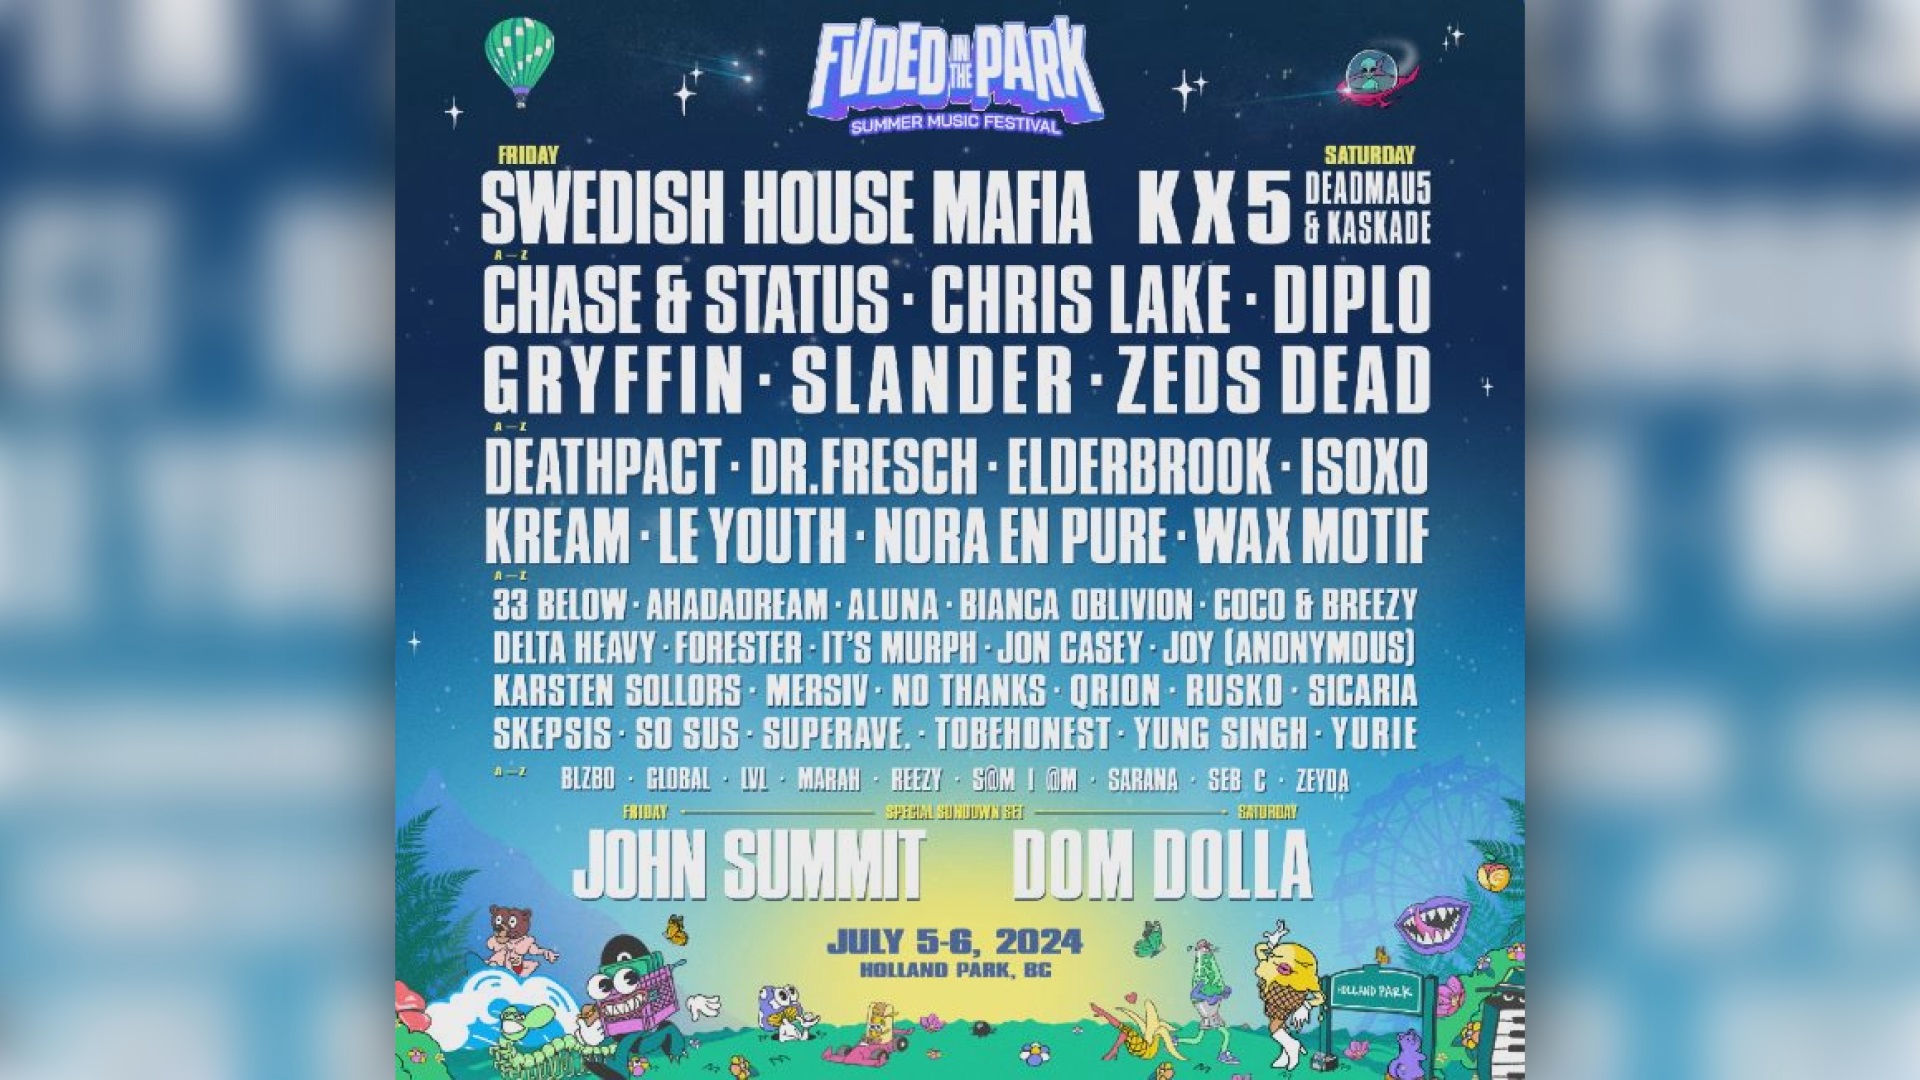 Surrey’s FVDED in the Park music festival returning in 2024